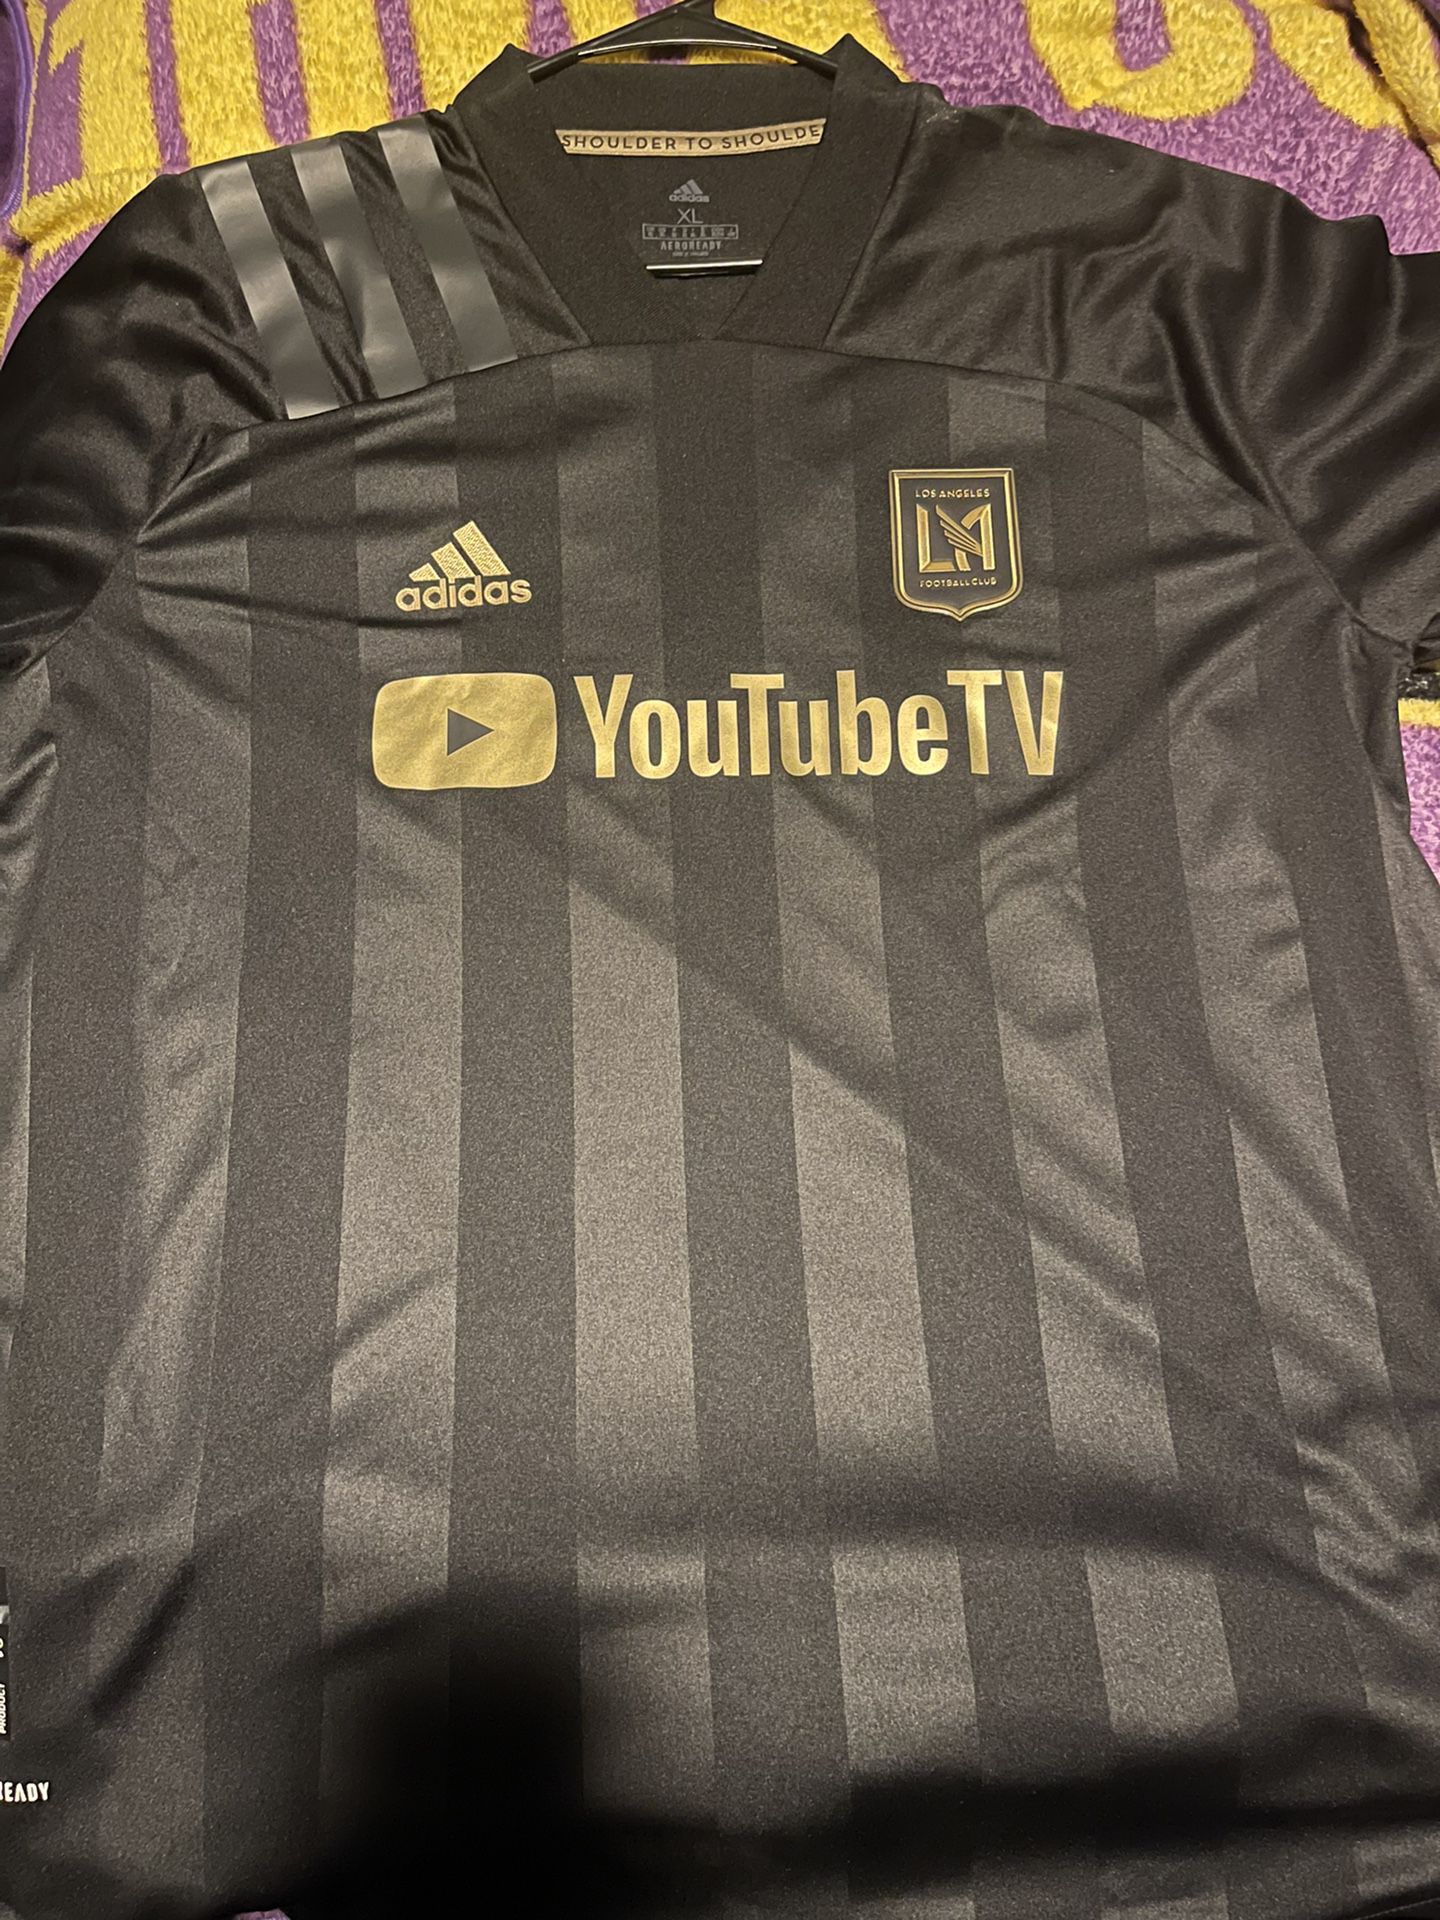 LAFC jersey for Sale in Palmdale, CA - OfferUp